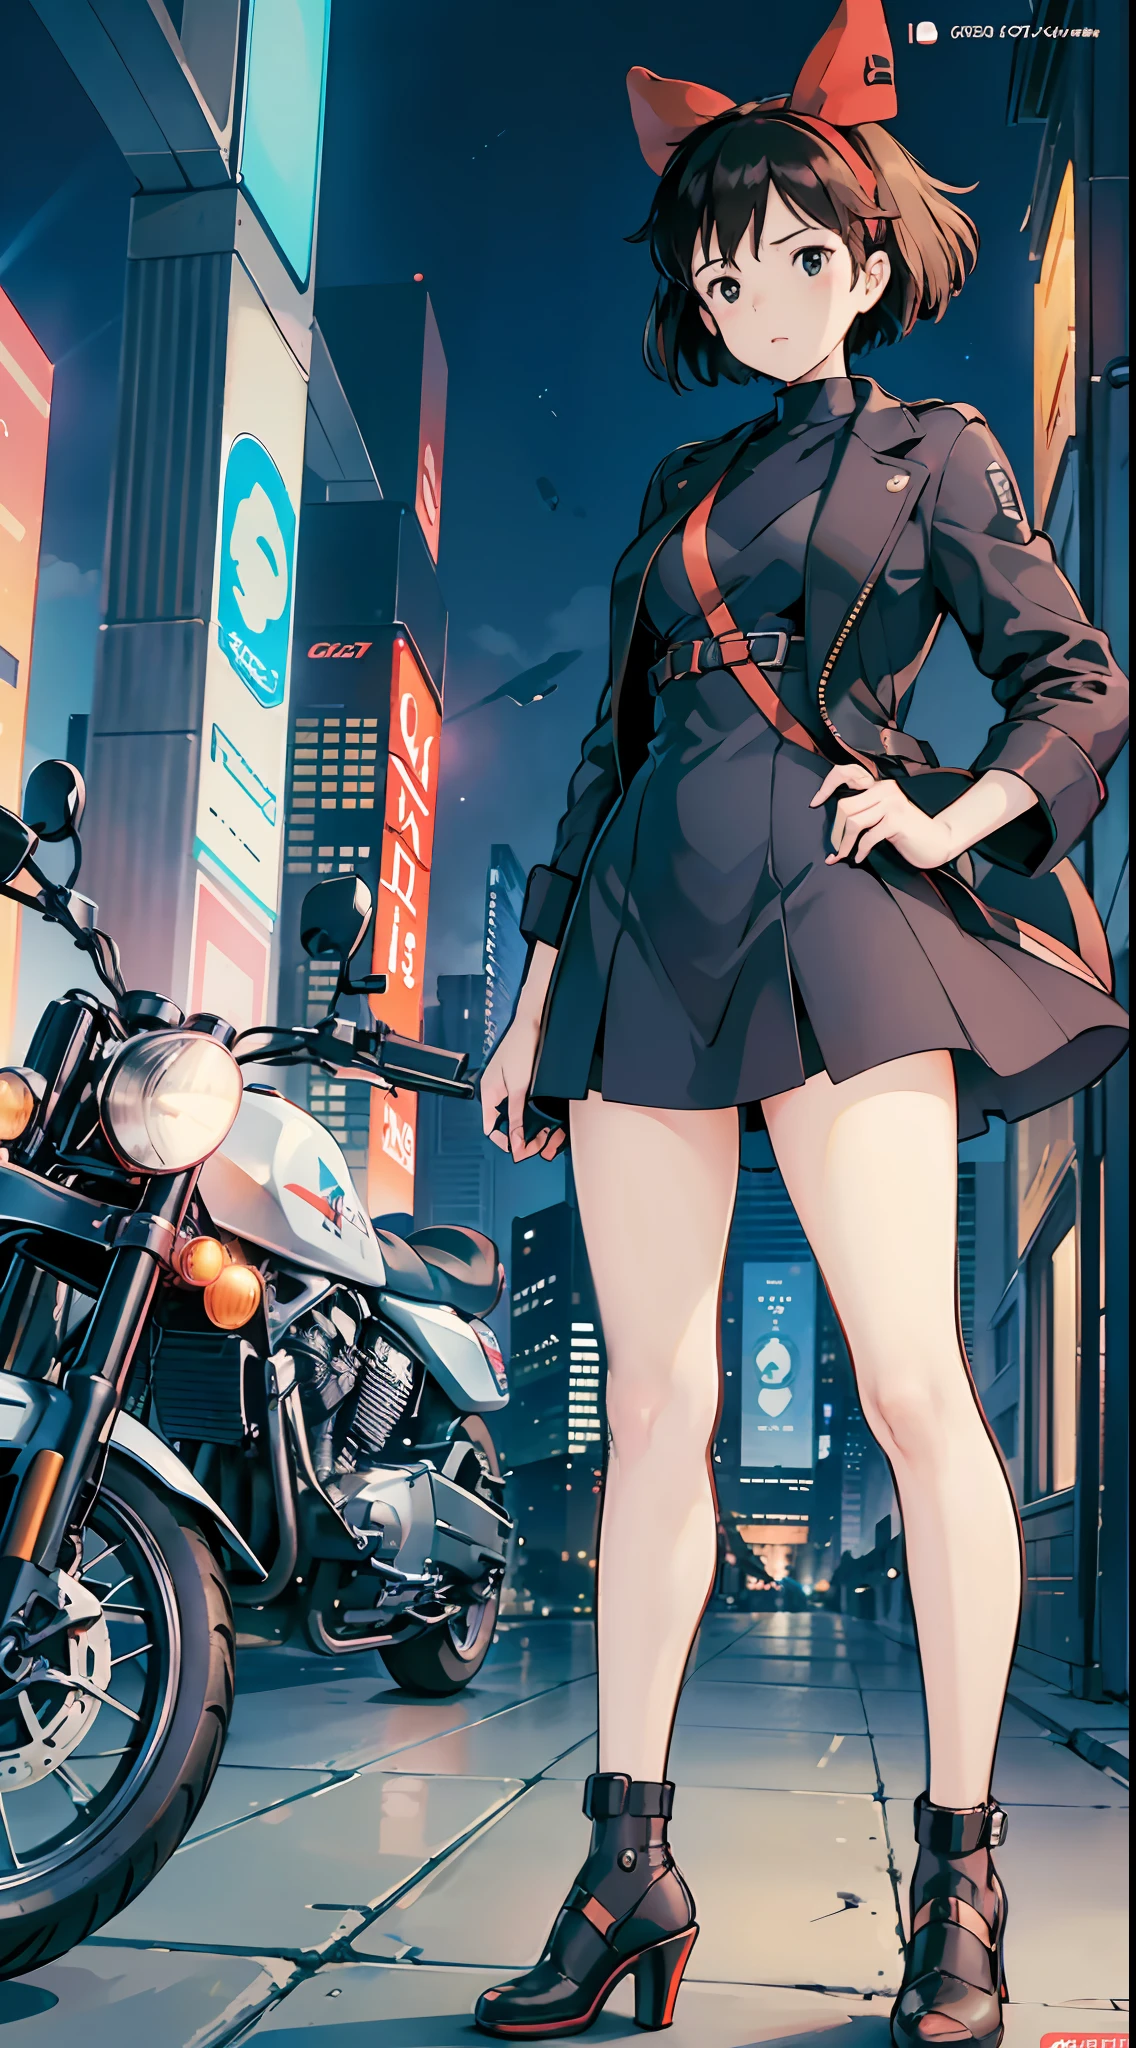 Best image quality, outstanding detail, ultra high resolution, (realism: 1.4), best illustration, prefer details, futuristic high-tech motorcycle, standing posture, Kiki posing, background is a high-tech lighting scene of futuristic city, black coat, slit, red ribbon, kiki, gigi, active,